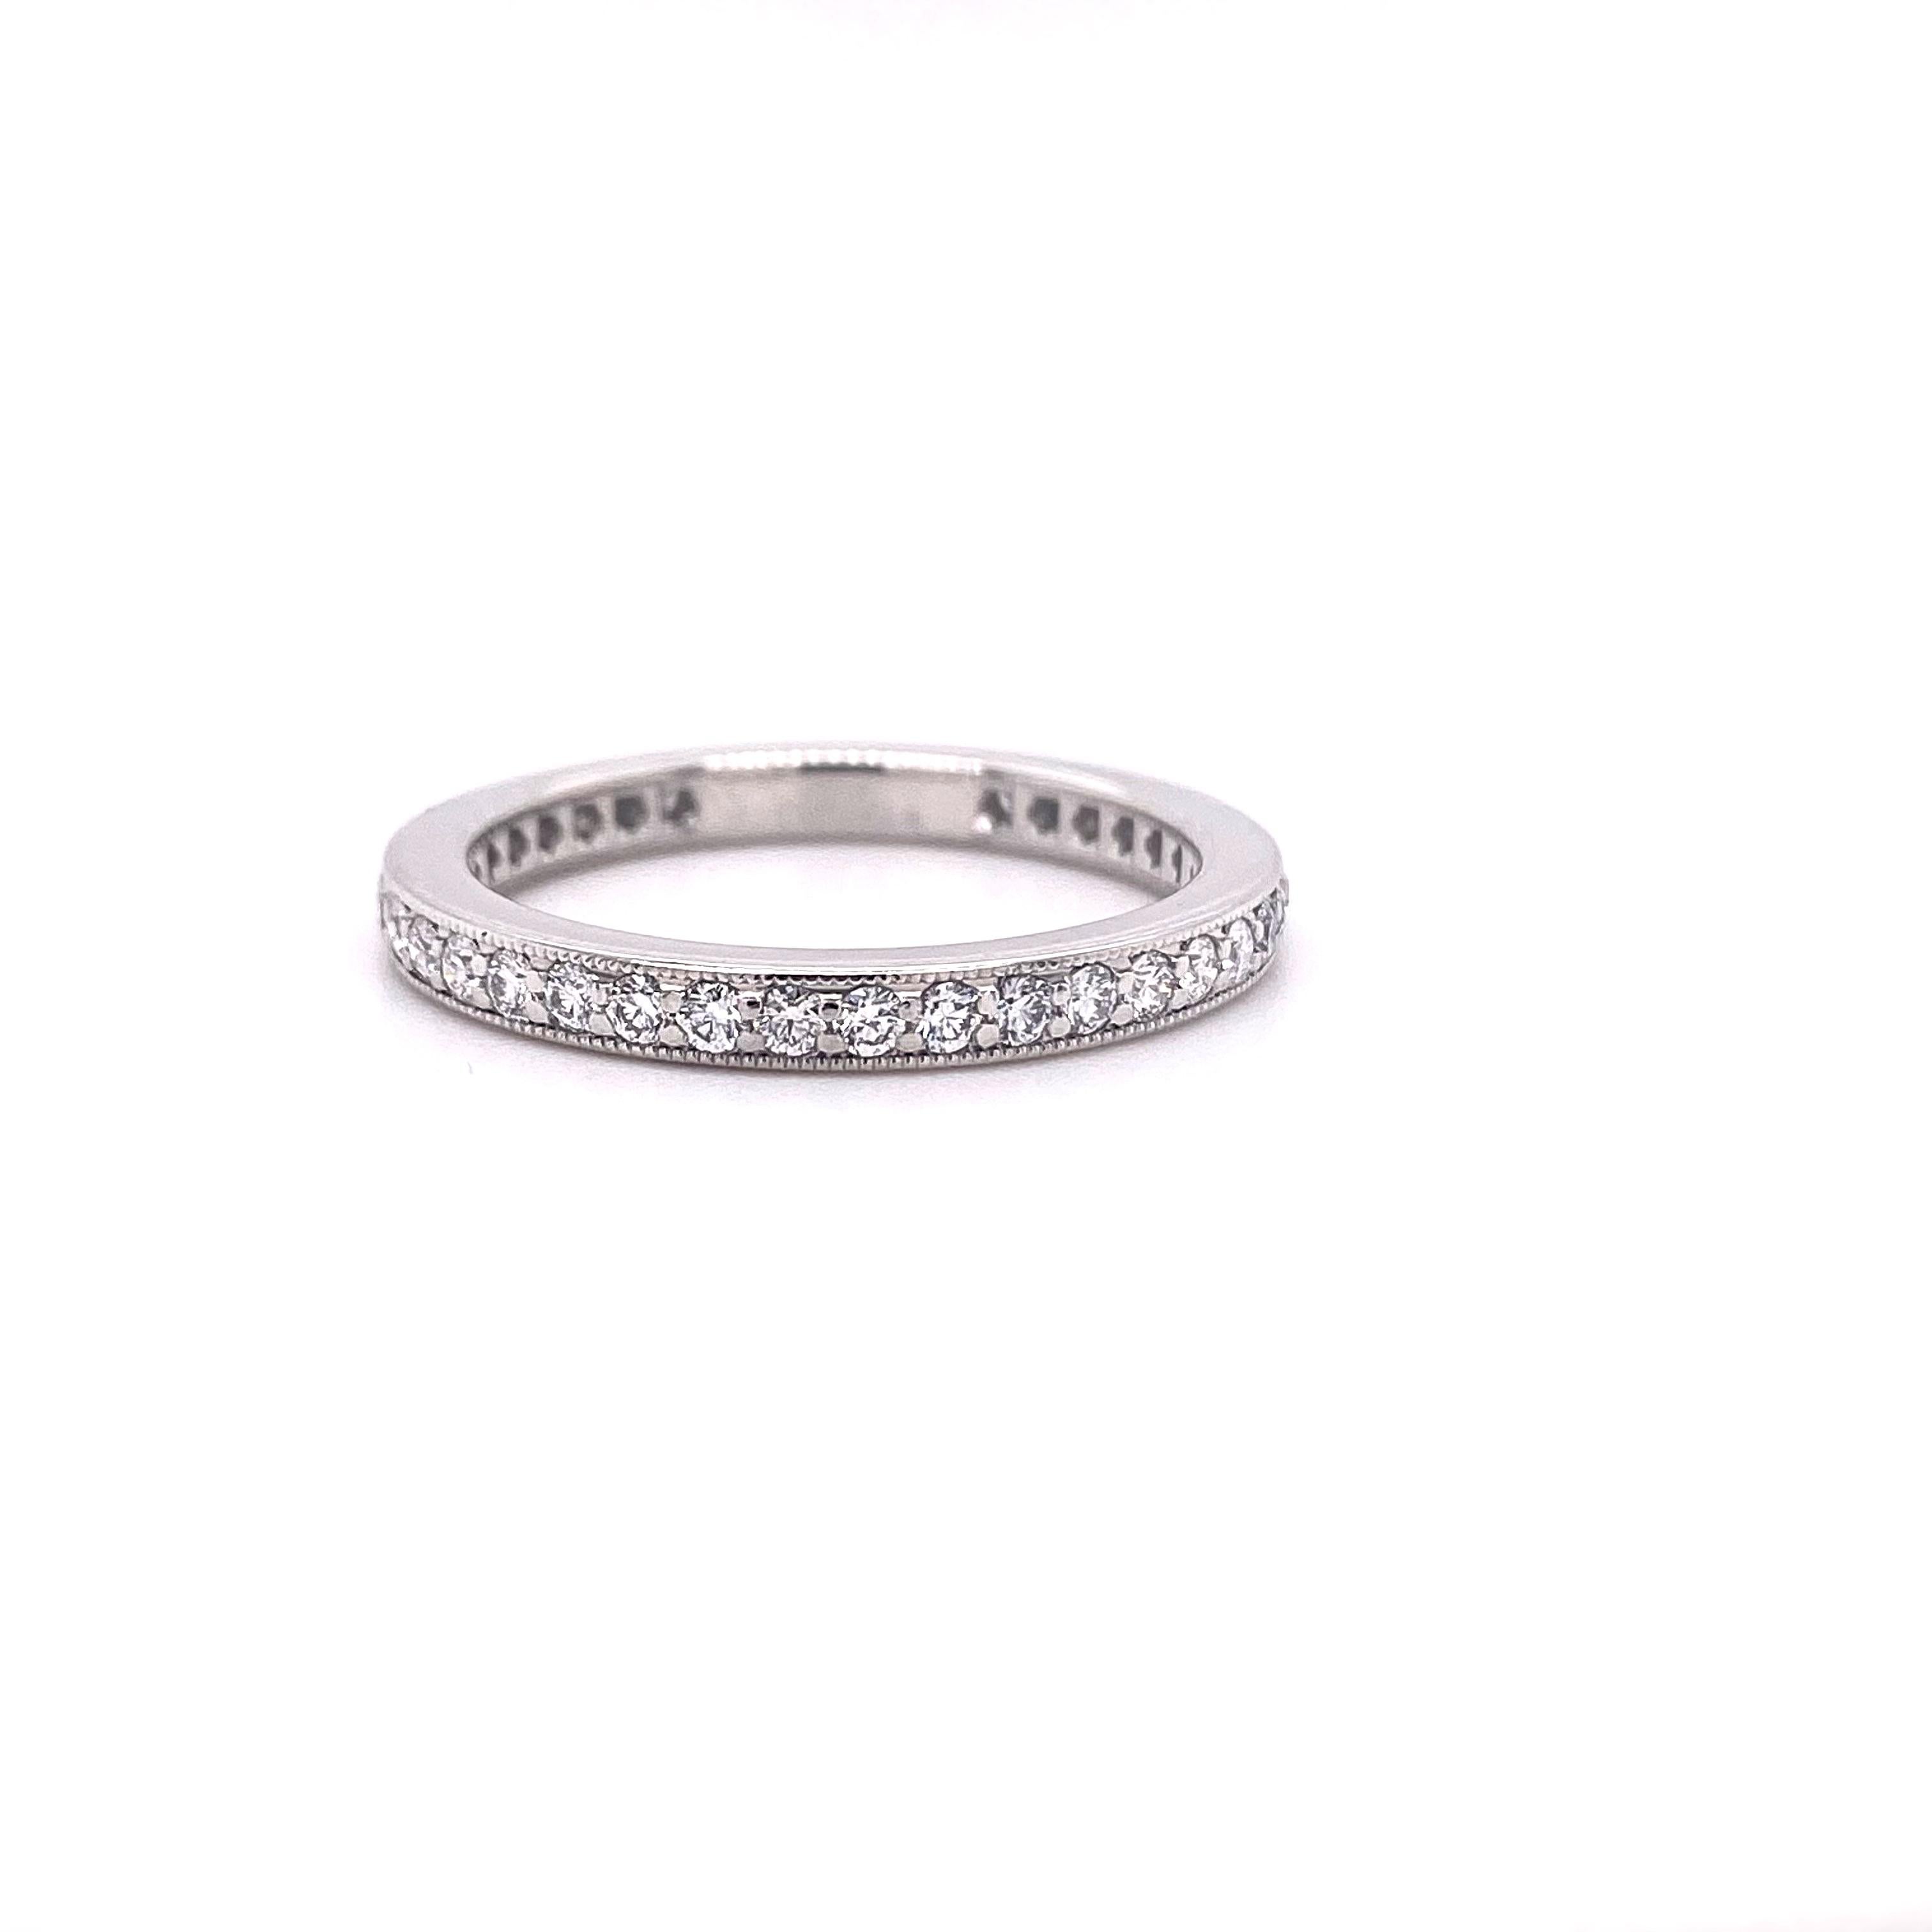 Tiffany & Co Legacy Collection Full Circle Diamond Wedding Band Ring Plat In Excellent Condition For Sale In San Diego, CA